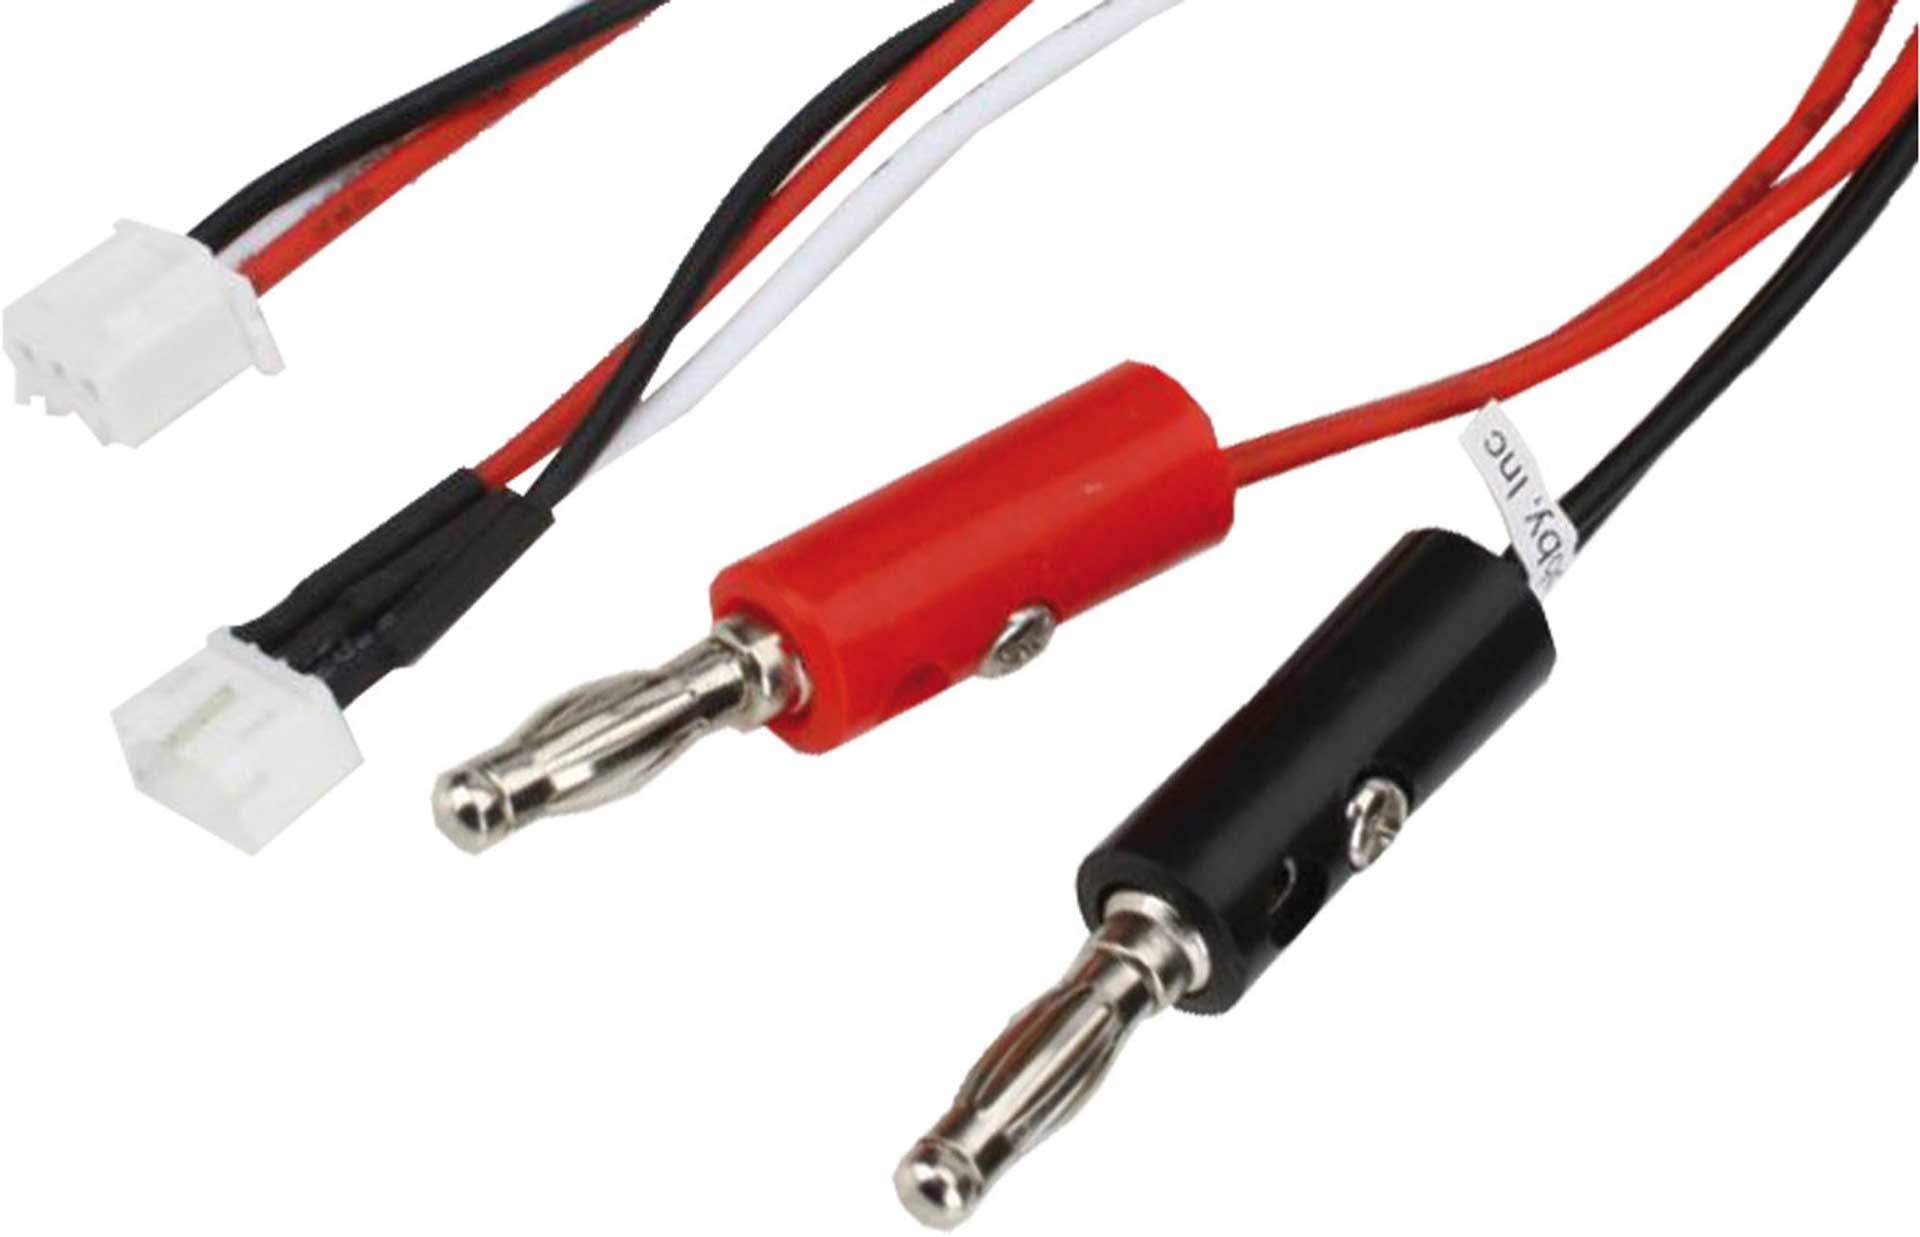 E-FLITE CHARGING CABLE UMX 2S MICRO MODELS